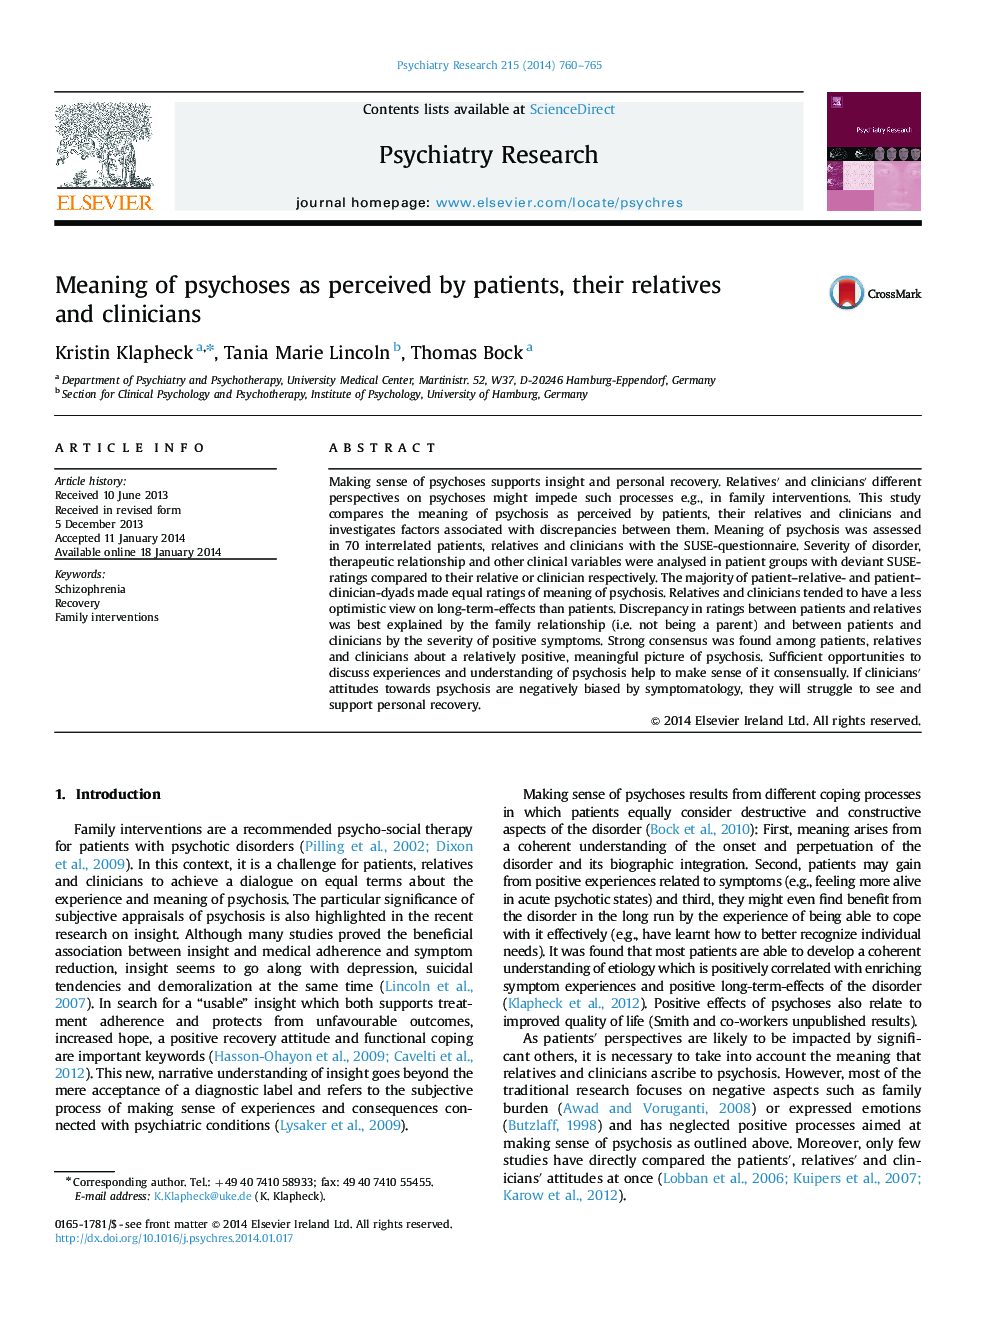 Meaning of psychoses as perceived by patients, their relatives and clinicians